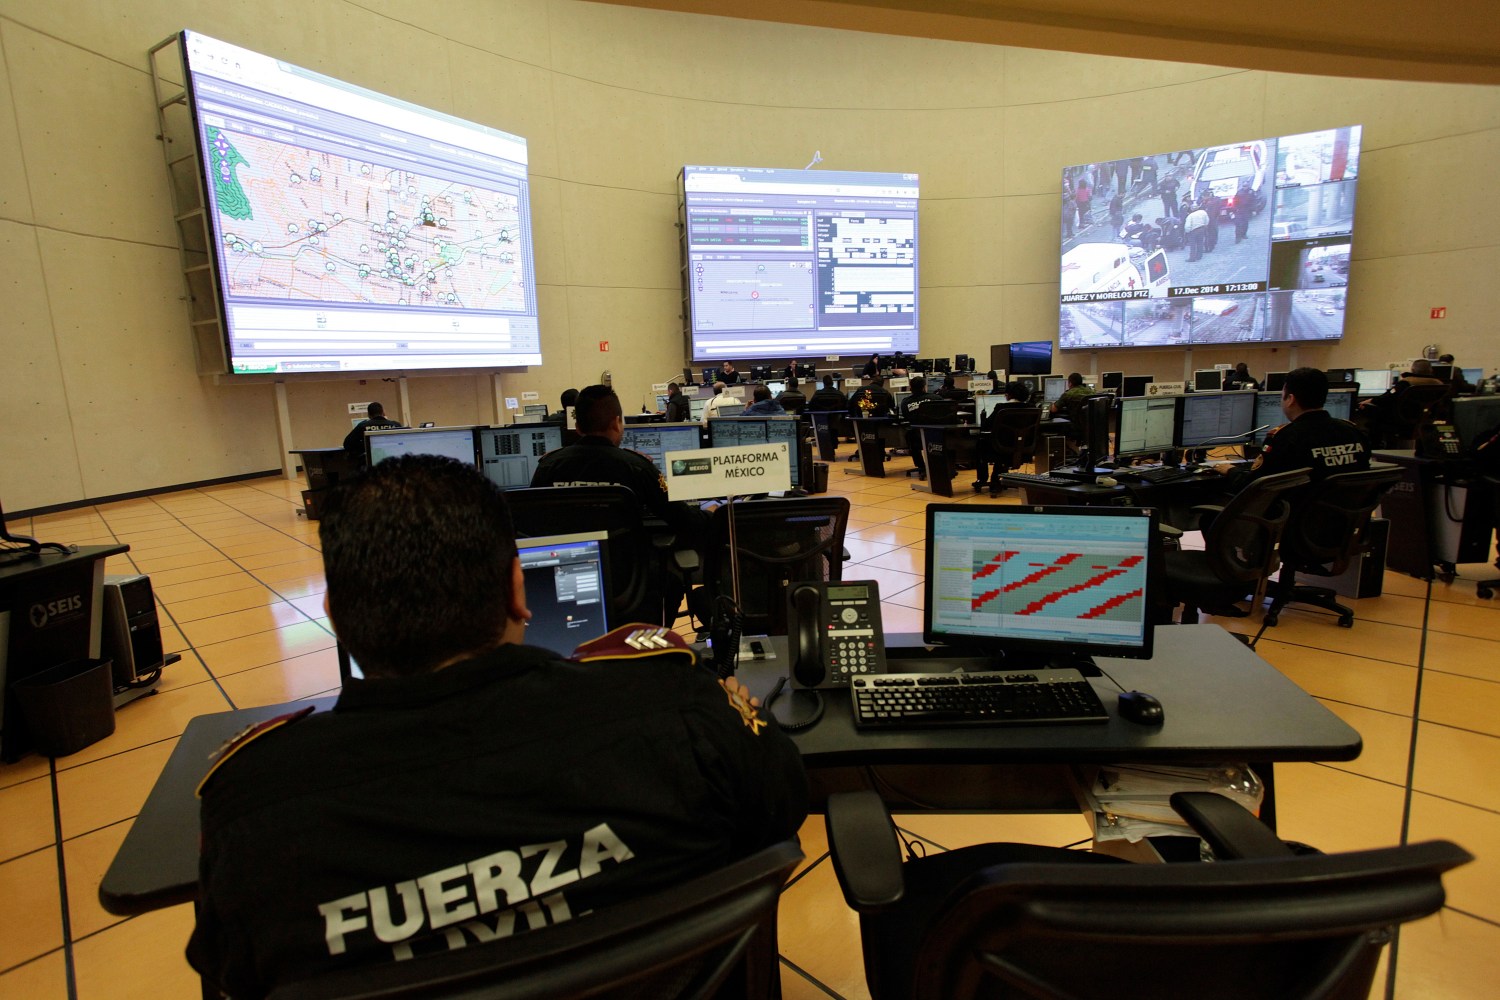 Police officers in Mexico monitor feeds from surveillance cameras displayed on several large monitors.